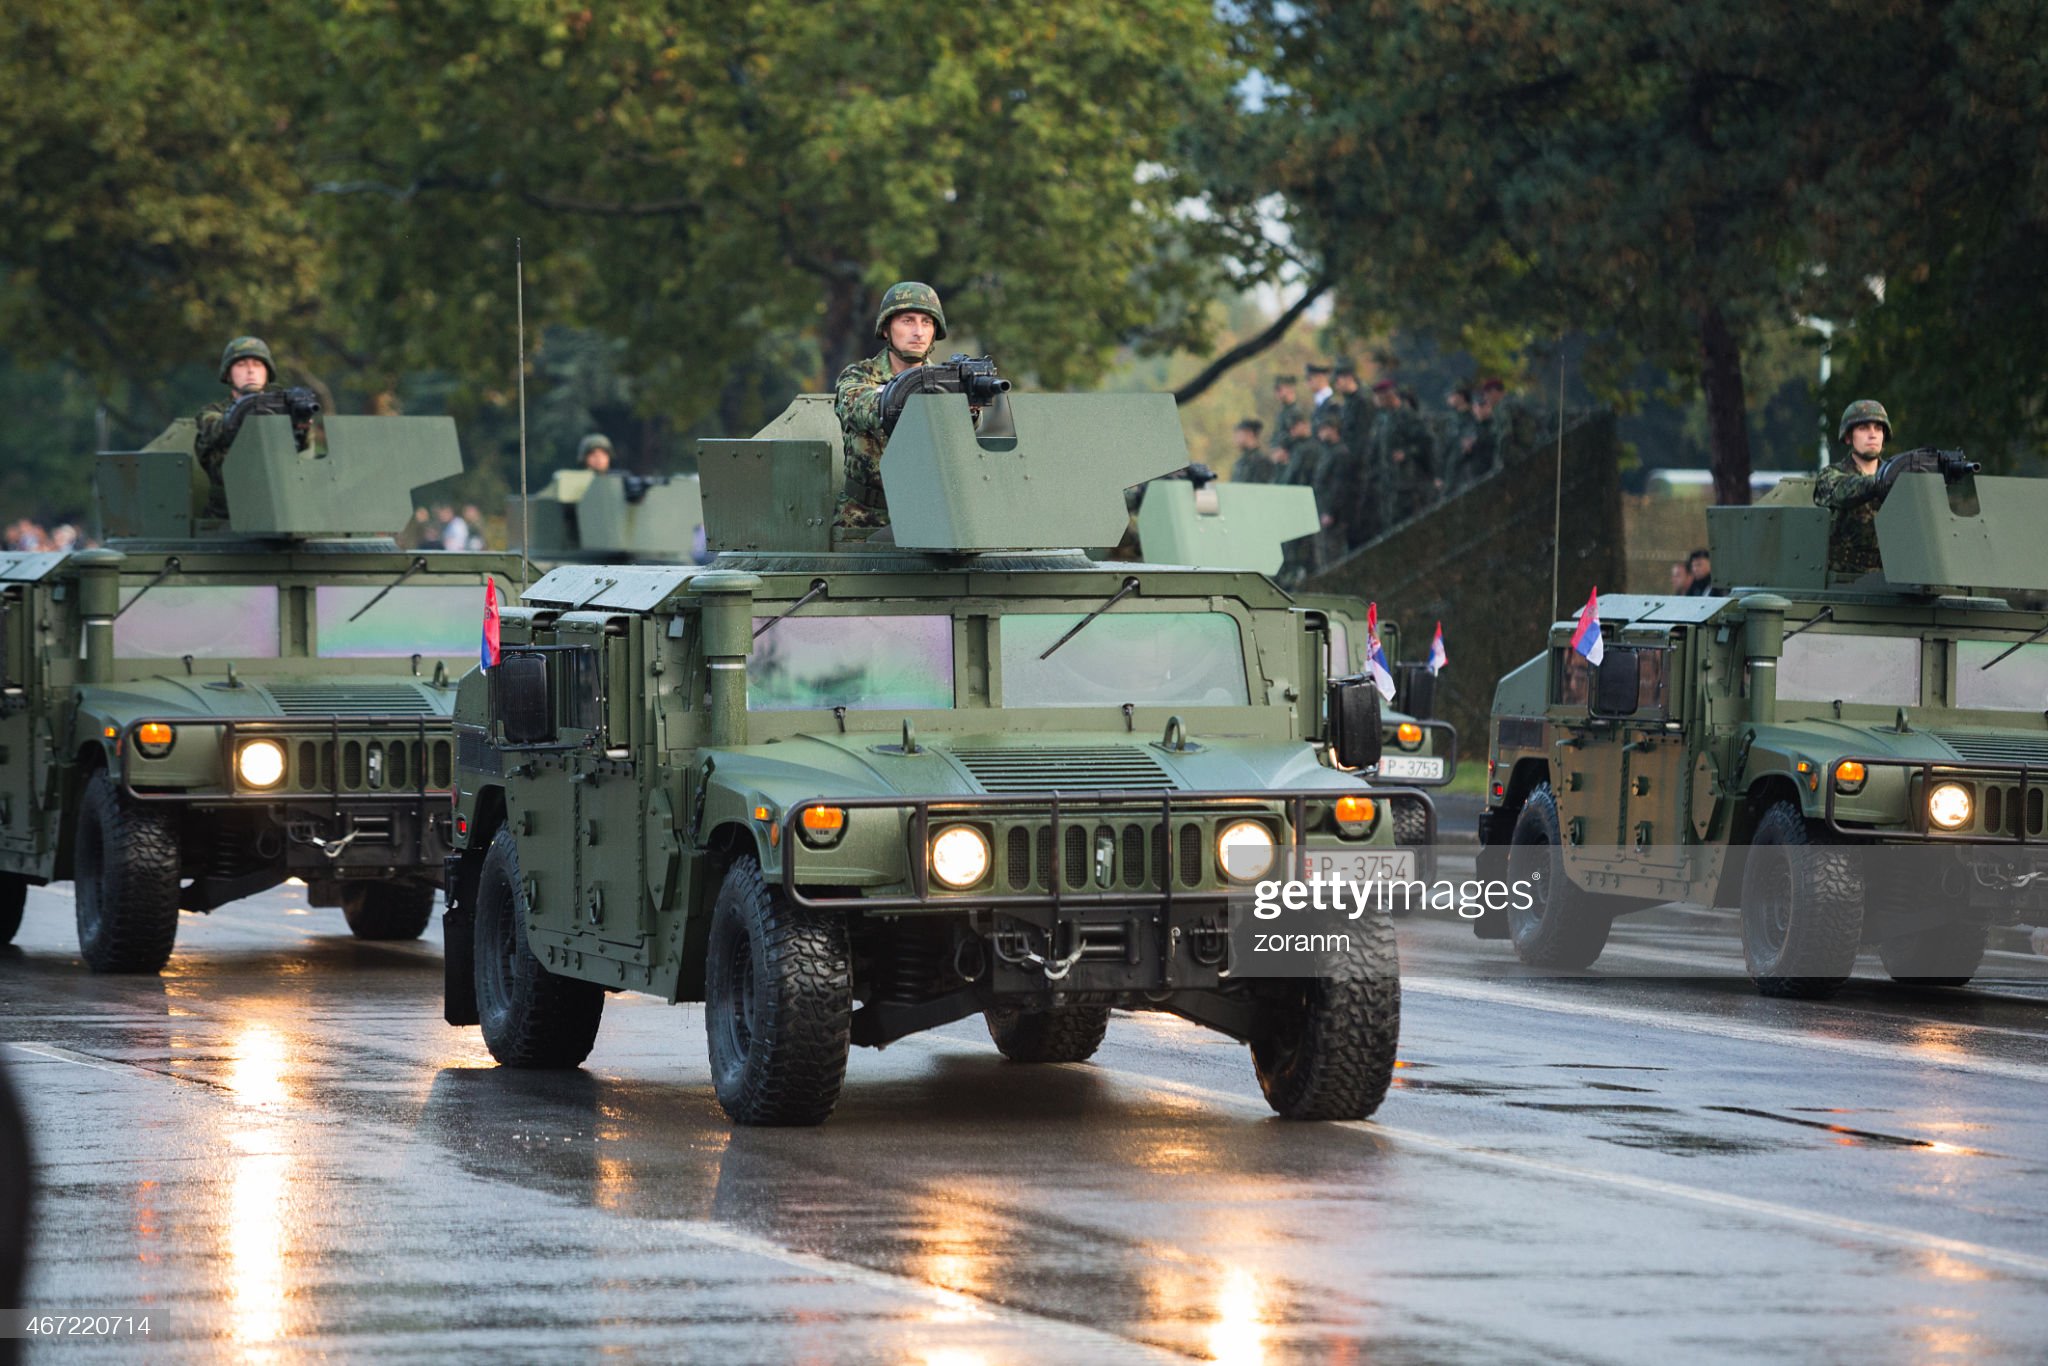 October 16, 2014: Serbian military in Hummer vehicles equipped with automated granade launcher, participating in military parade held in Belgrade.